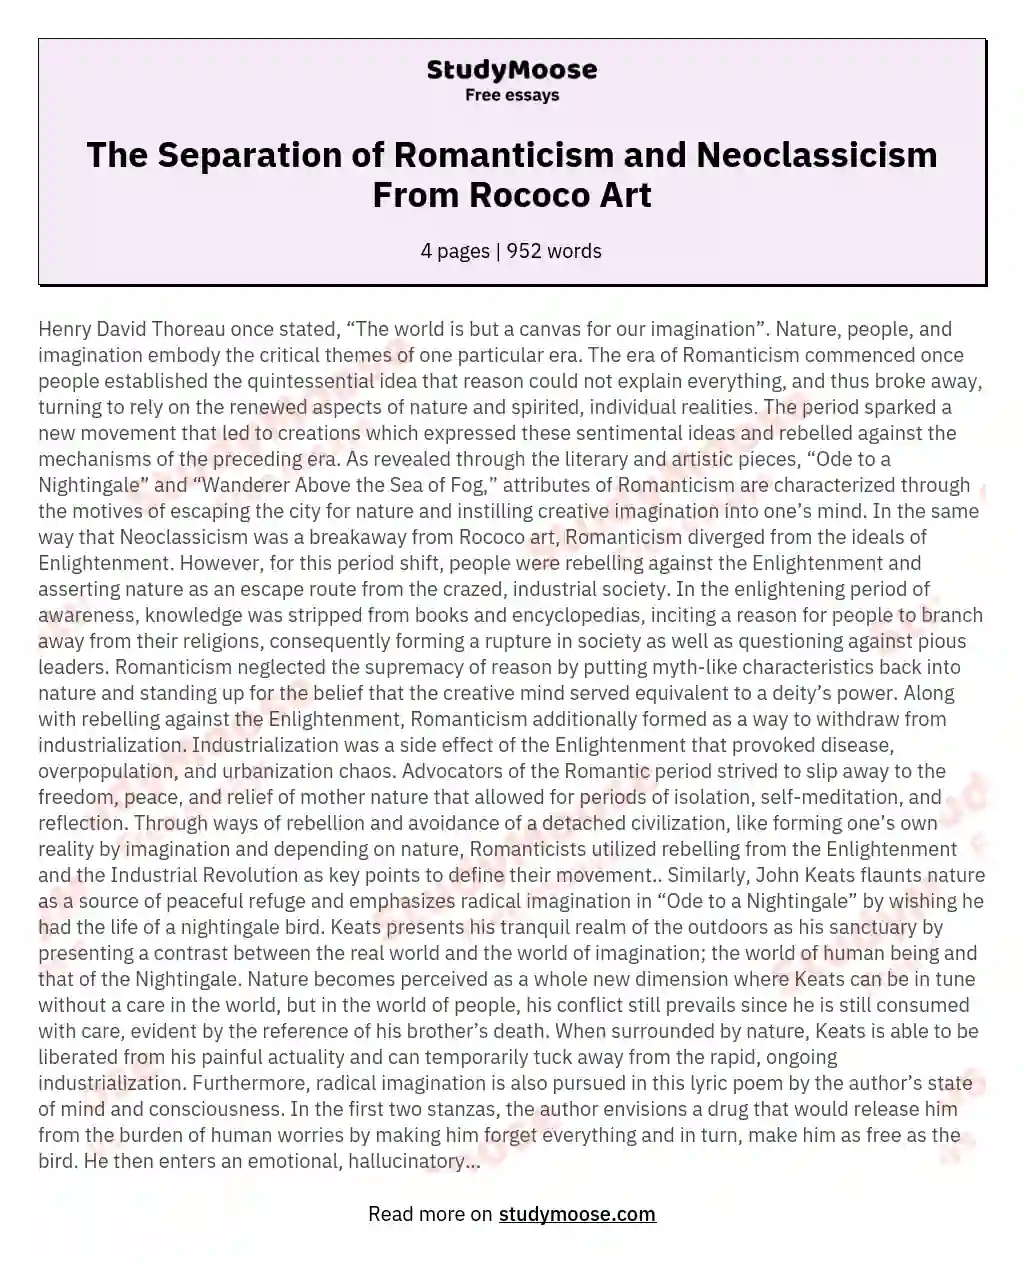 The Separation of Romanticism and Neoclassicism From Rococo Art essay